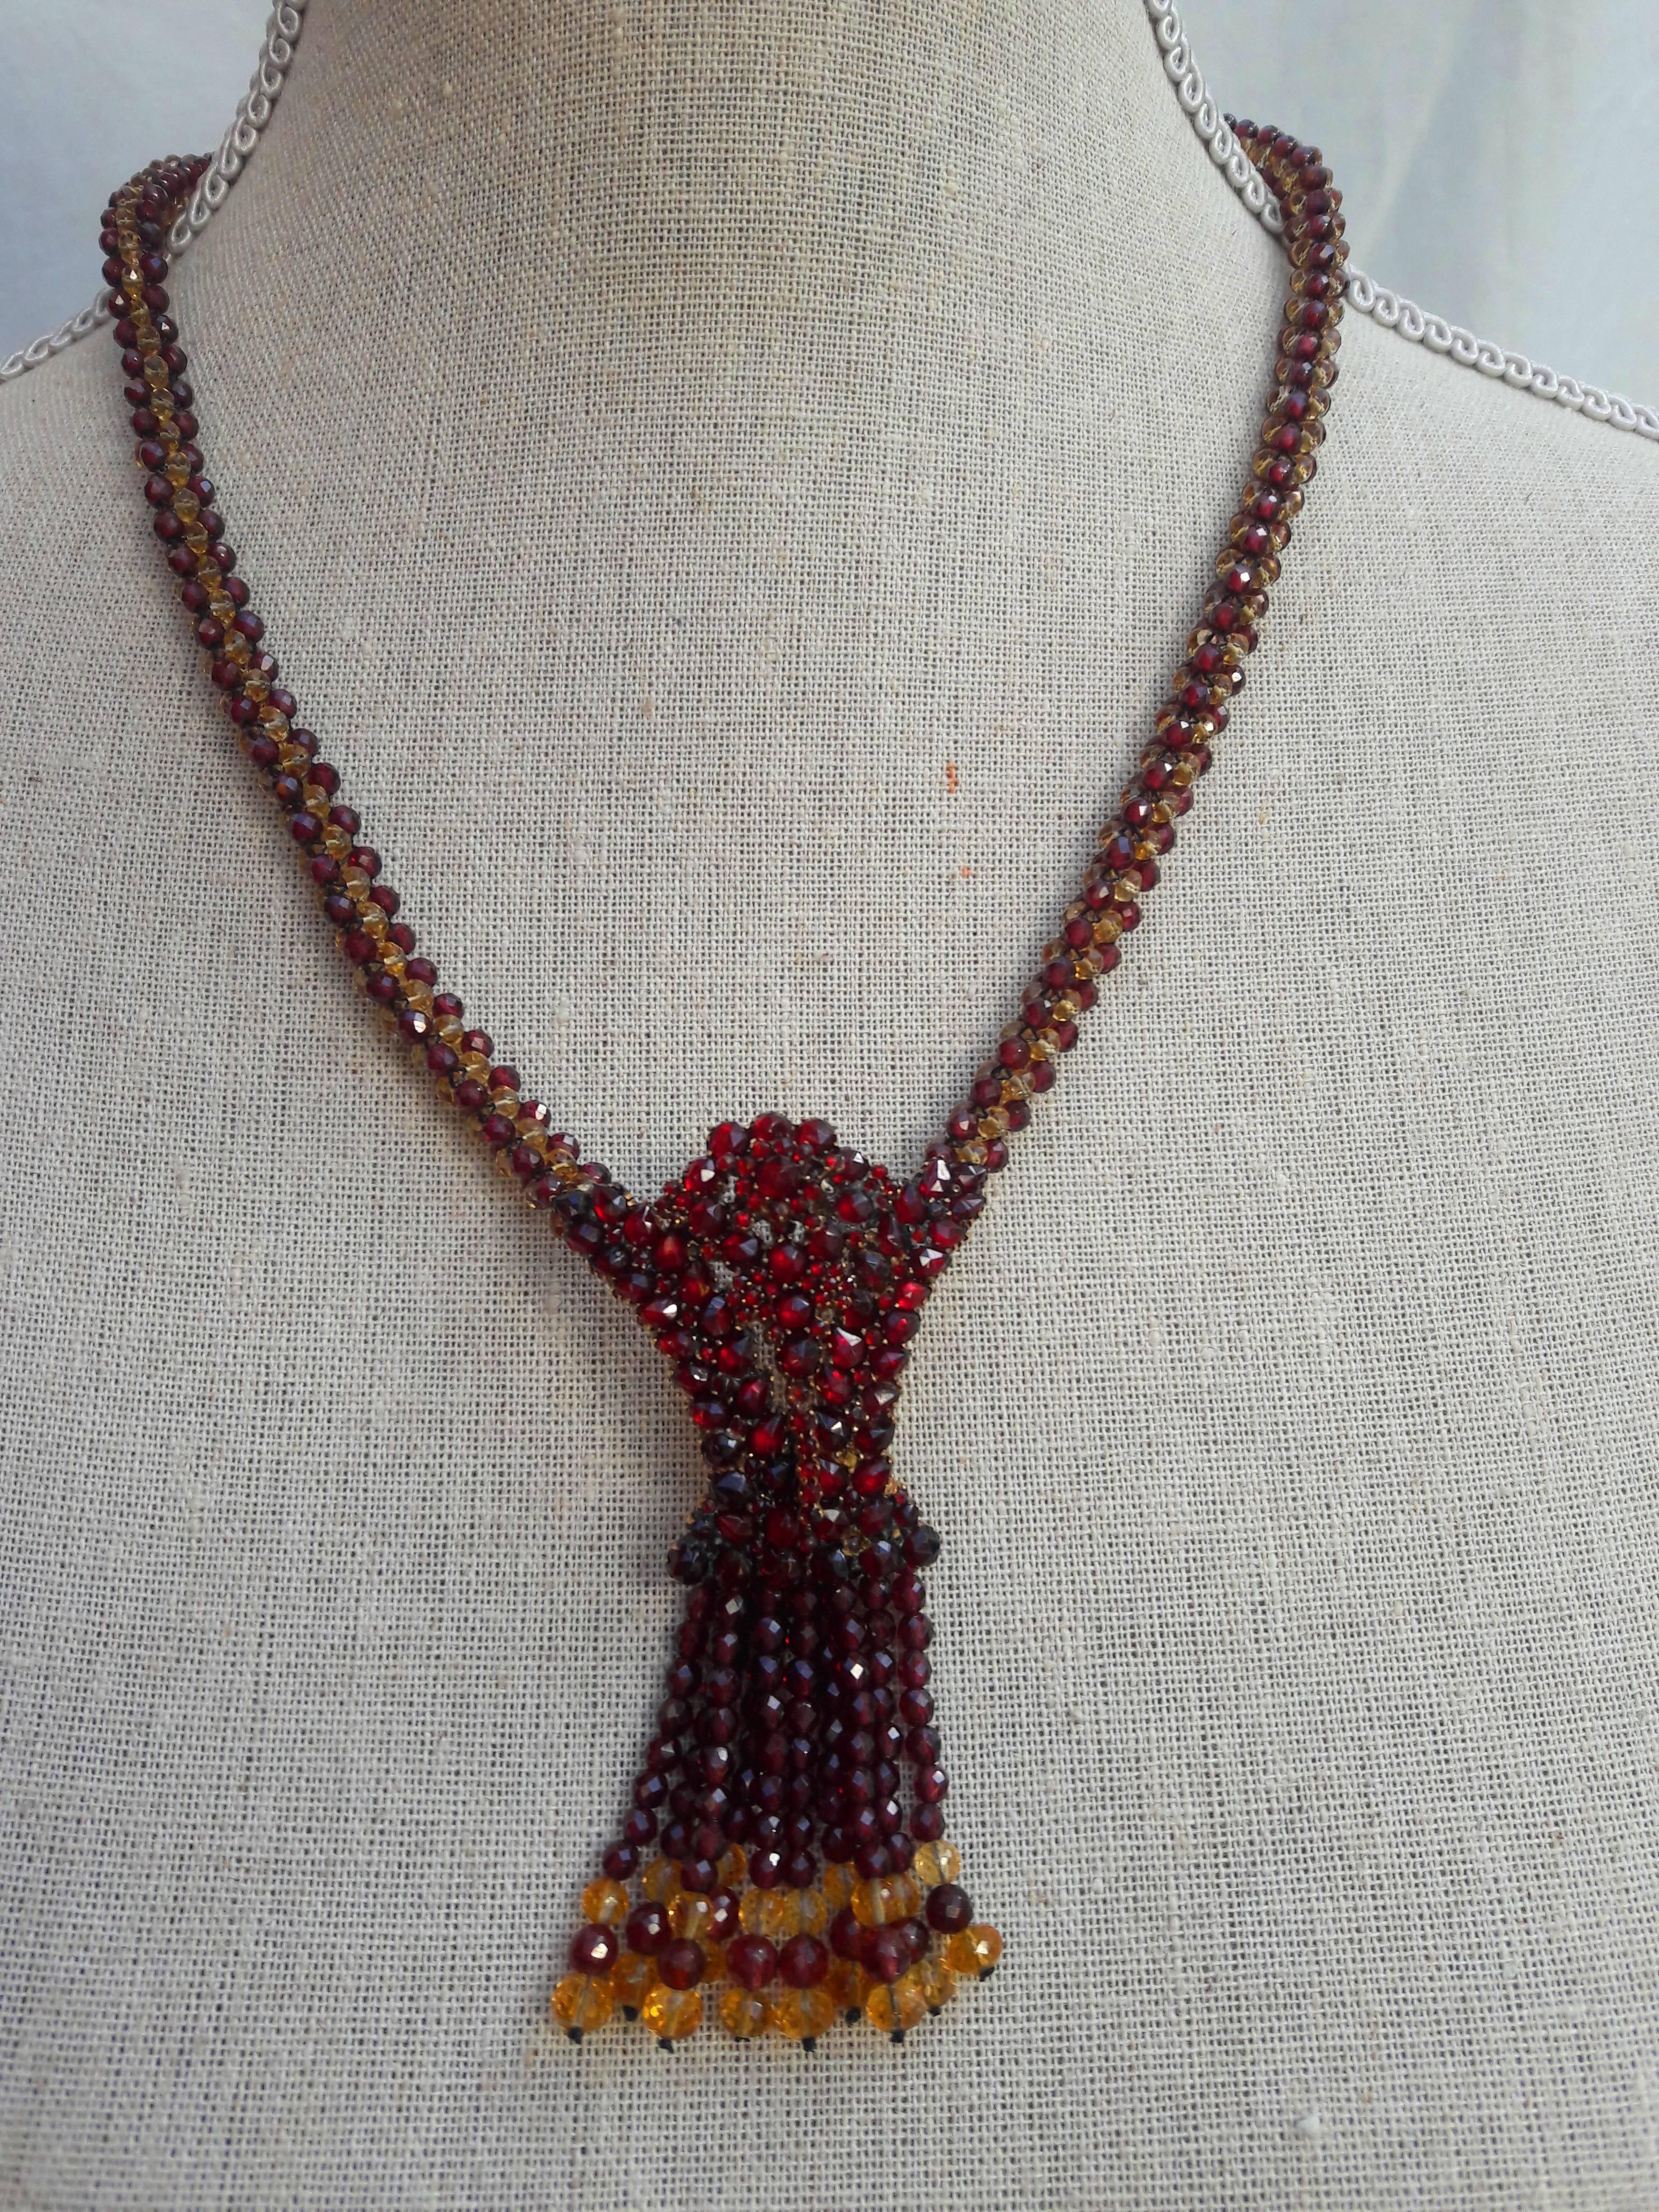 A truly one of a kind piece. This sophisticated and dramatic necklace makes a very visual statement.

Faceted Citrine and Garnet faceted beads (3mm) are woven together into a tight, round rope. This unique design makes for a very comfortable wearing